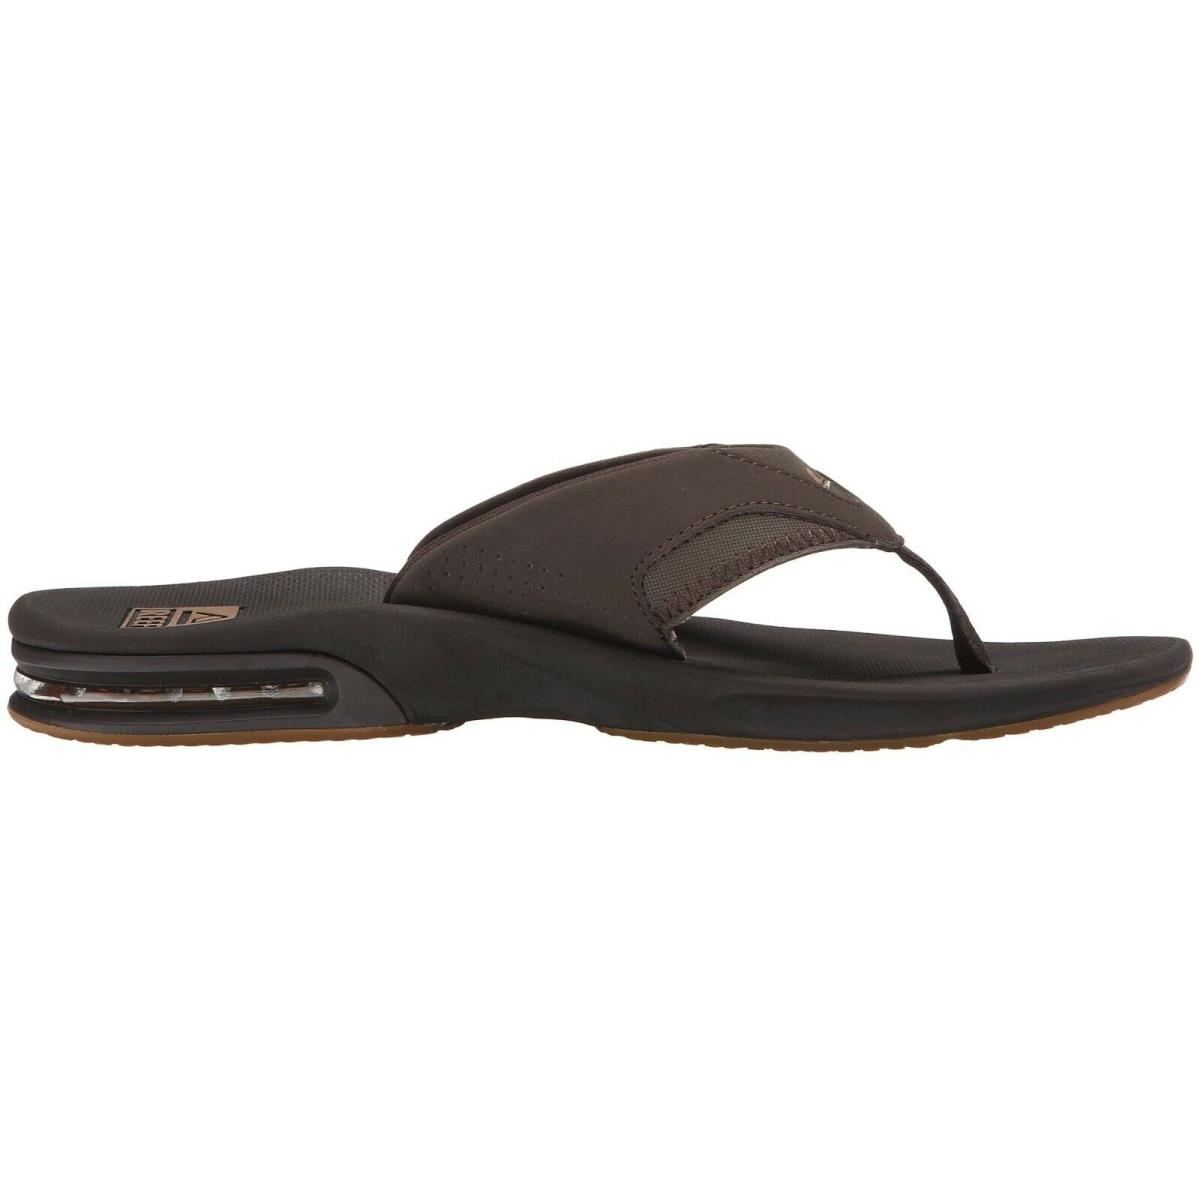 Man Reef Fanning Flip Flop Sandal RF2026 with Arch Support Color Brown/gum - Brown/Gum